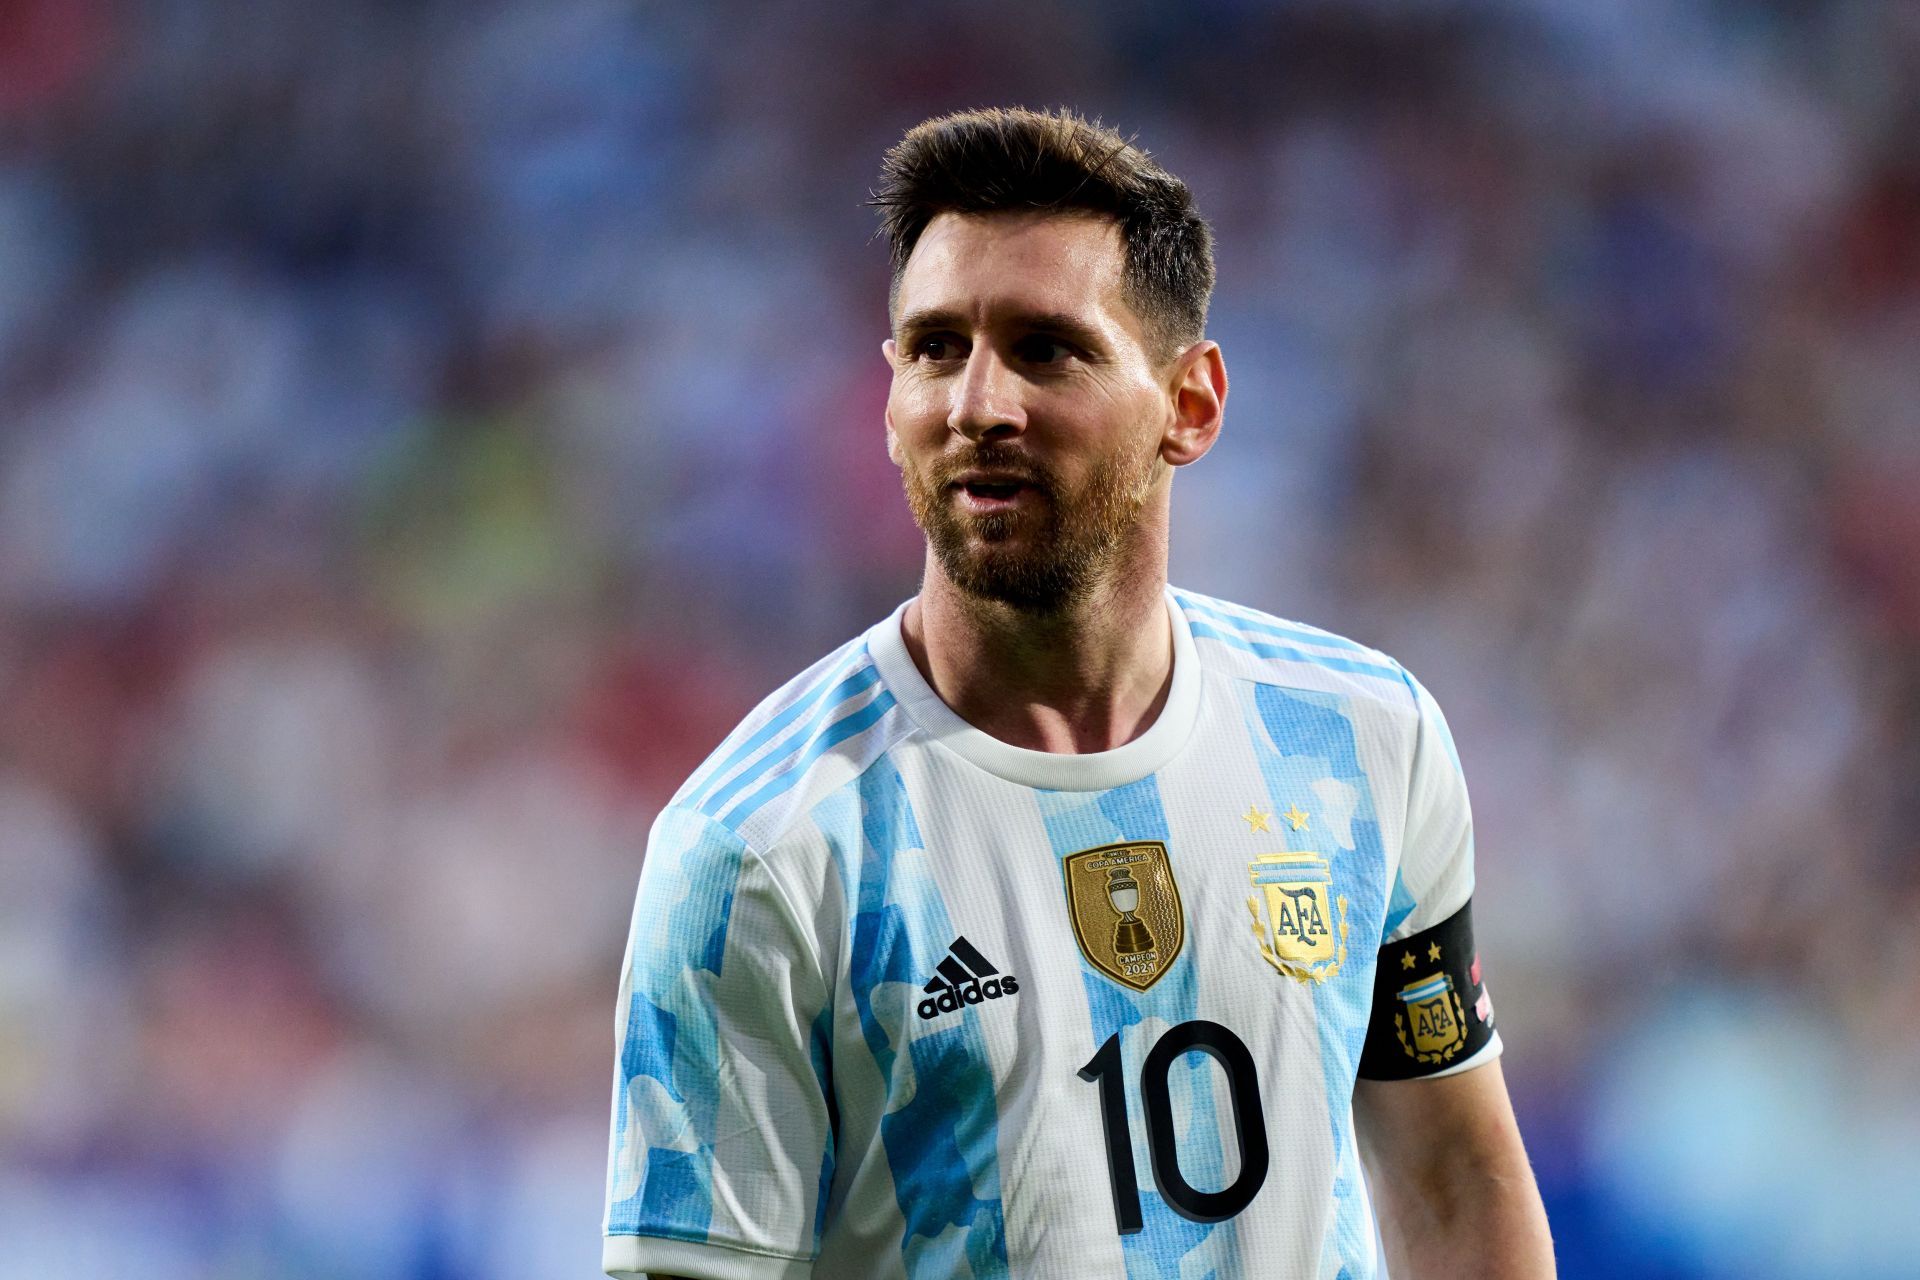 Lionel Messi has enjoyed great success with Argentina in the past year.